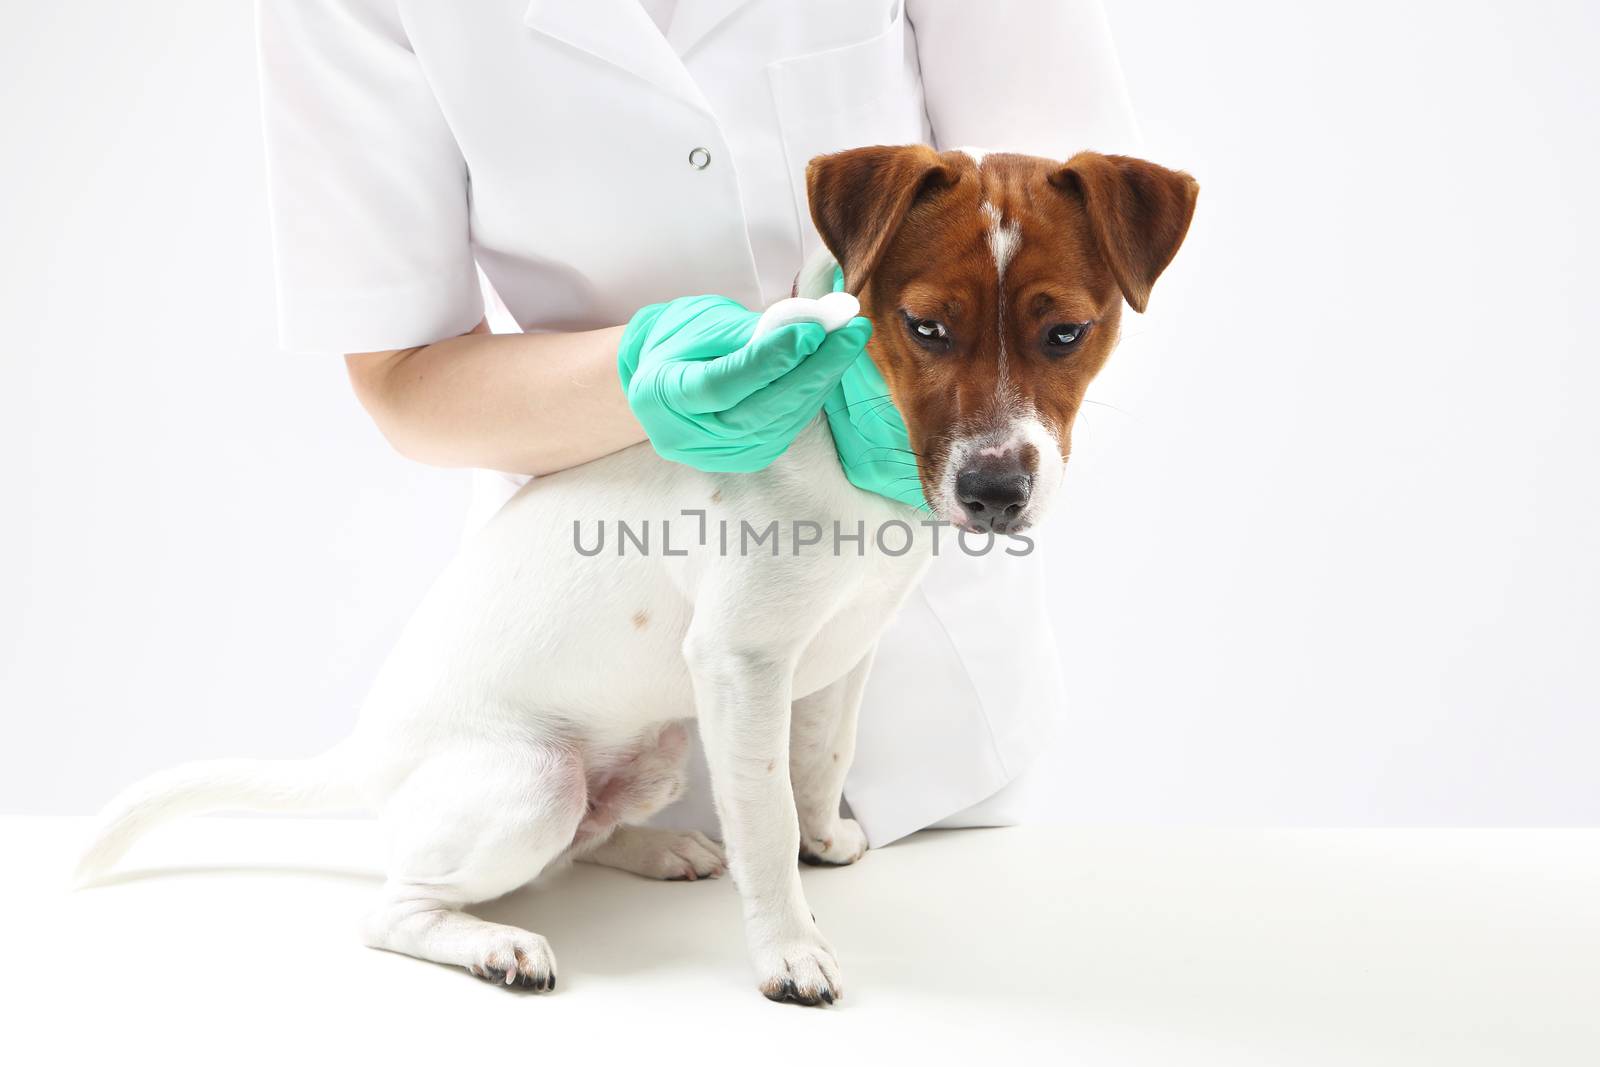 Young dog, jack russell terrier during surgery at veterinarian